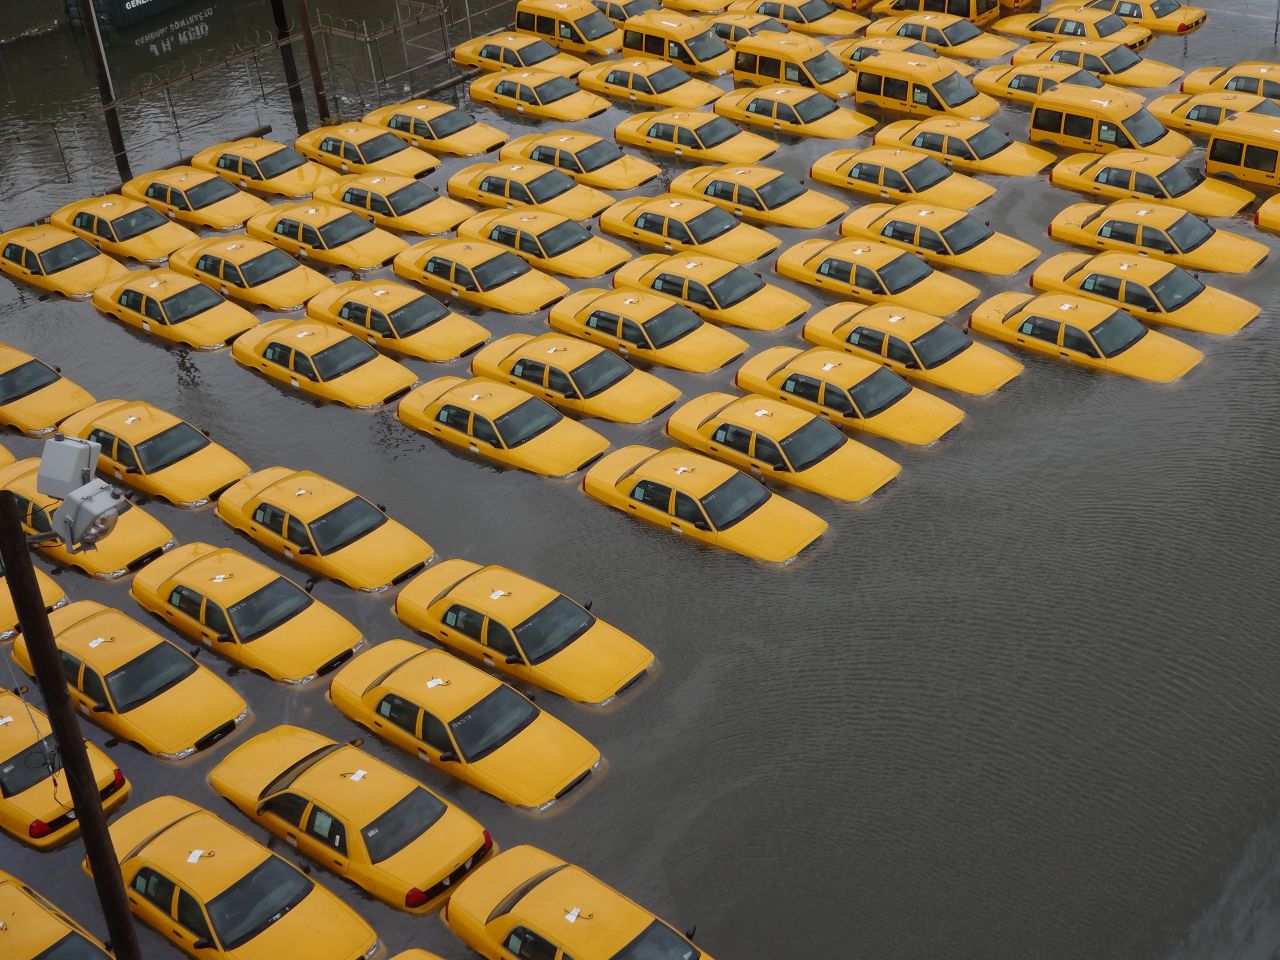 A fleet of taxi cabs sat submerged in a flooded parking lot in <a href="http://ireport.cnn.com/docs/DOC-868854">Hoboken, New Jersey</a>, after Superstorm Sandy hit the area in October. Photographer Jonathan Otto said, "The picture was taken from the 14th street viaduct looking over the corner of Jefferson and 14th street, where it appears New York stores new cabs."